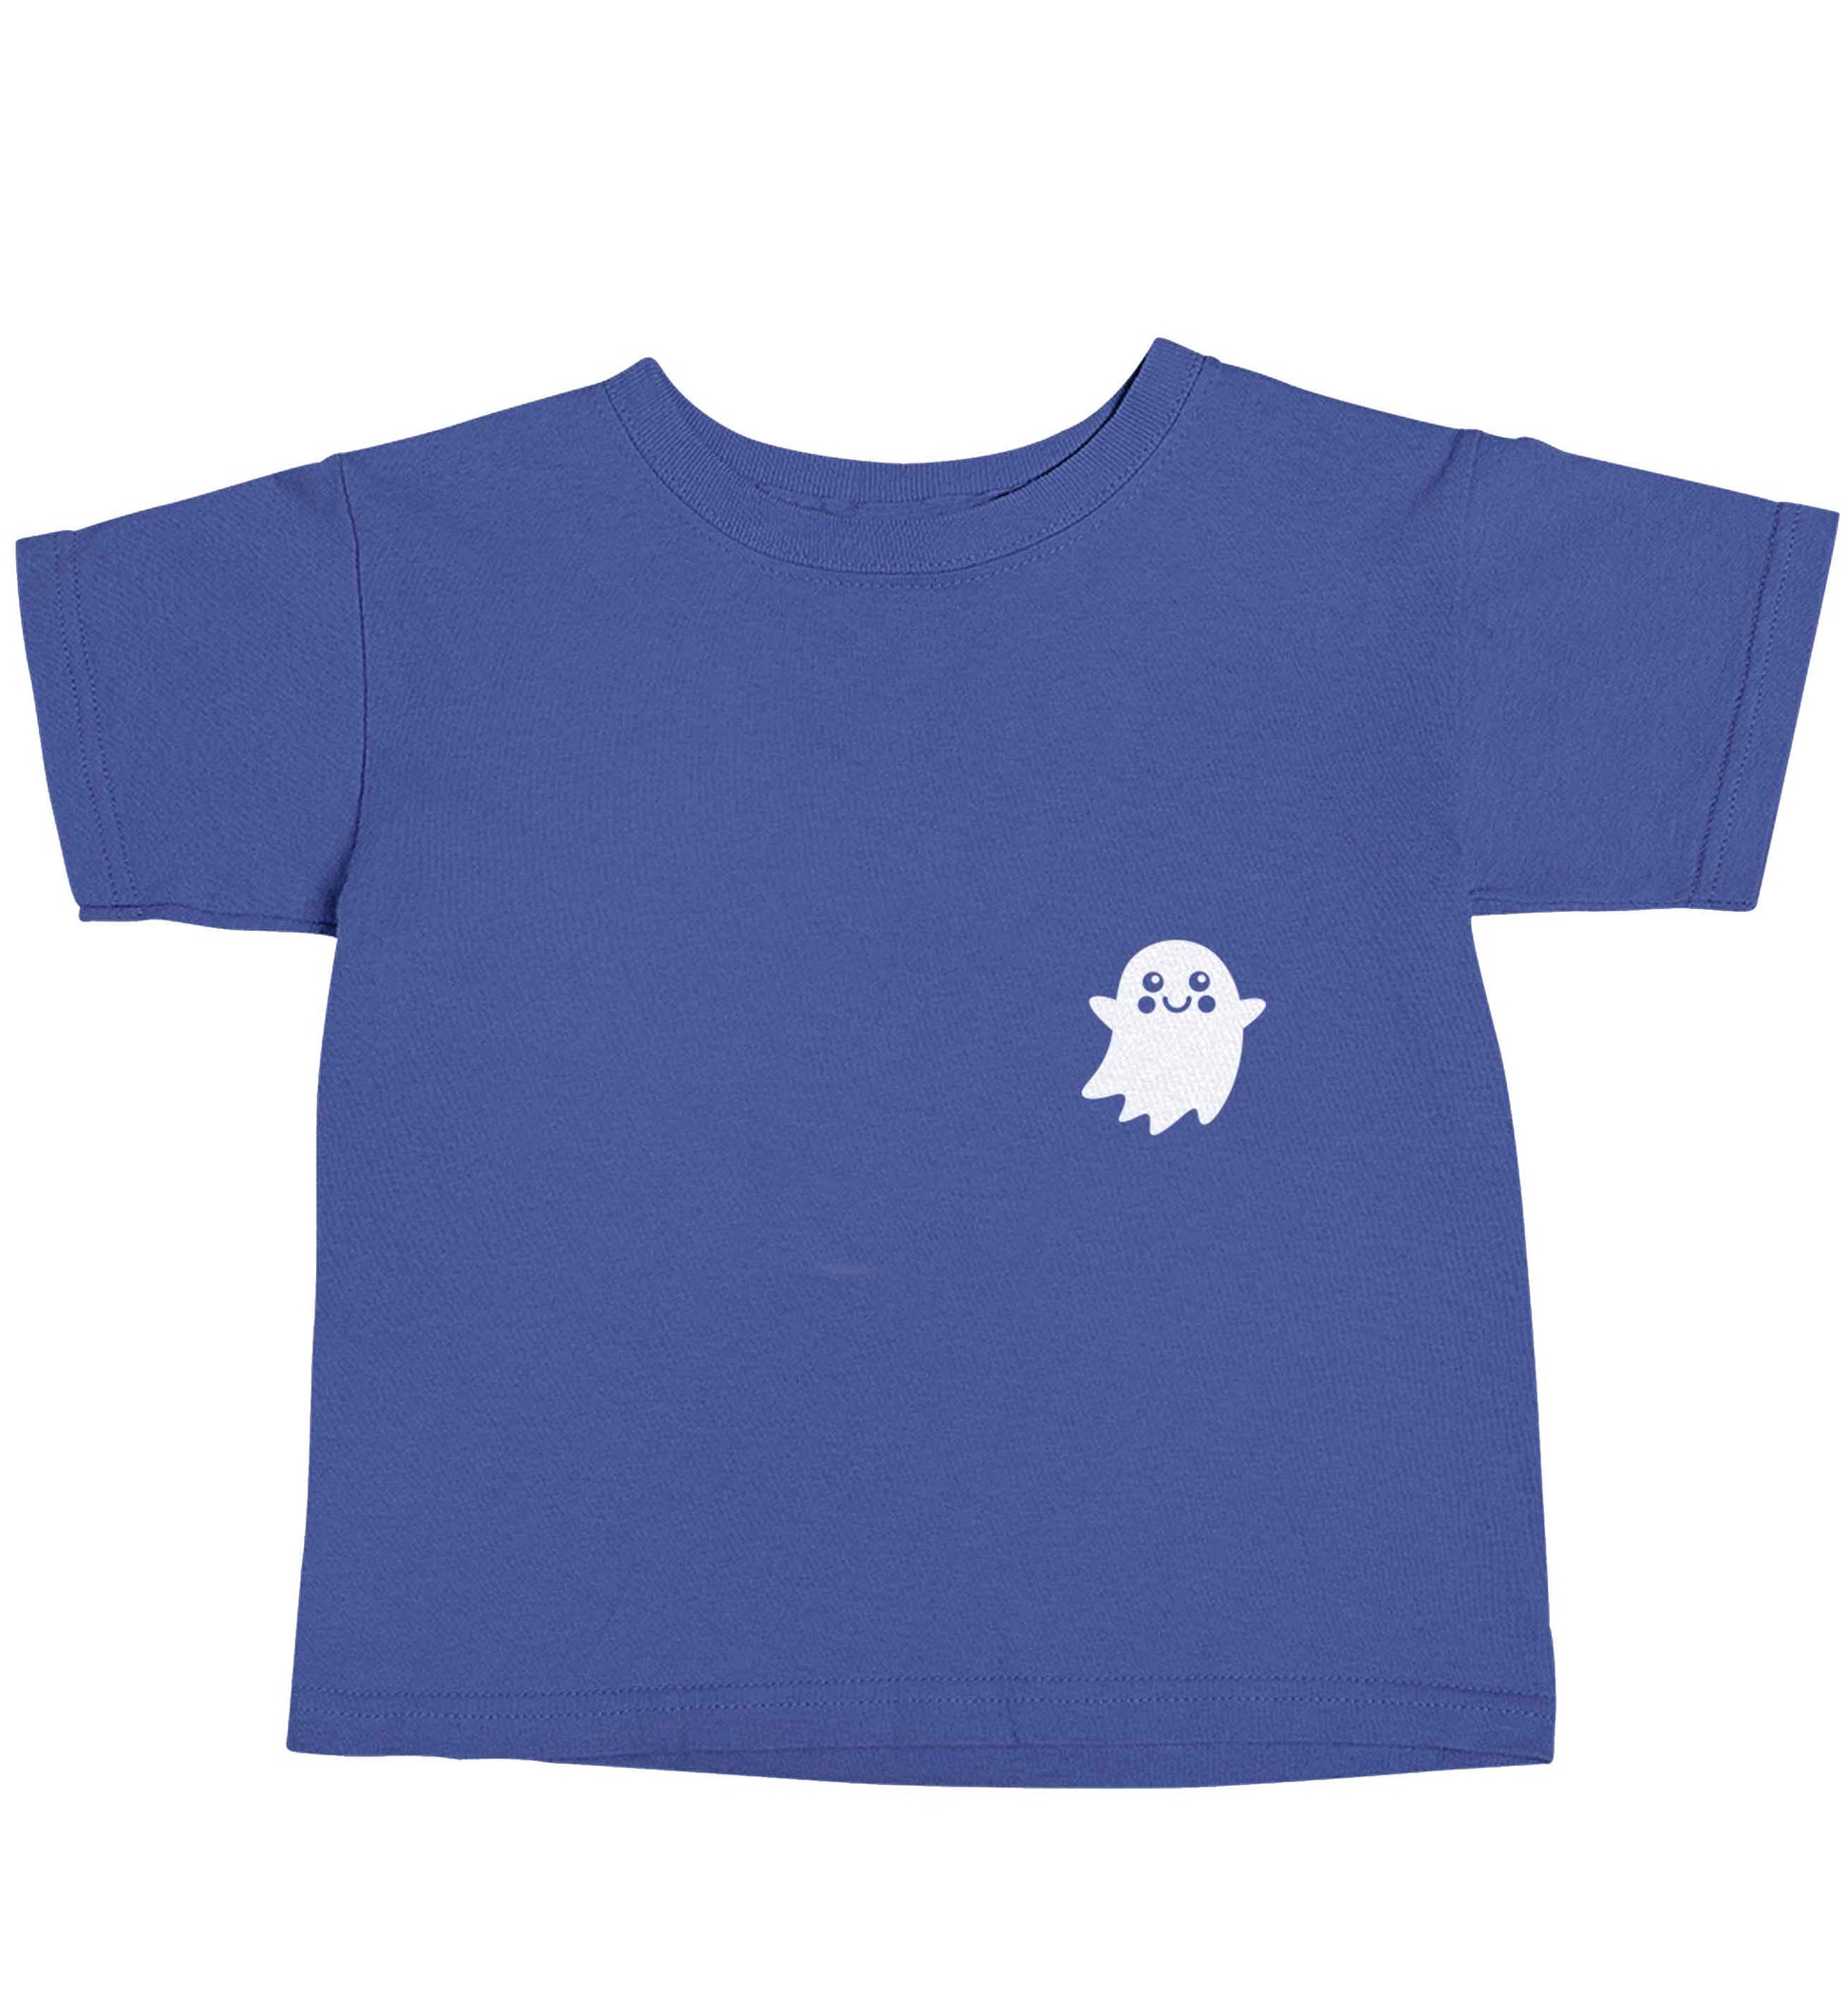 Pocket ghost blue baby toddler Tshirt 2 Years